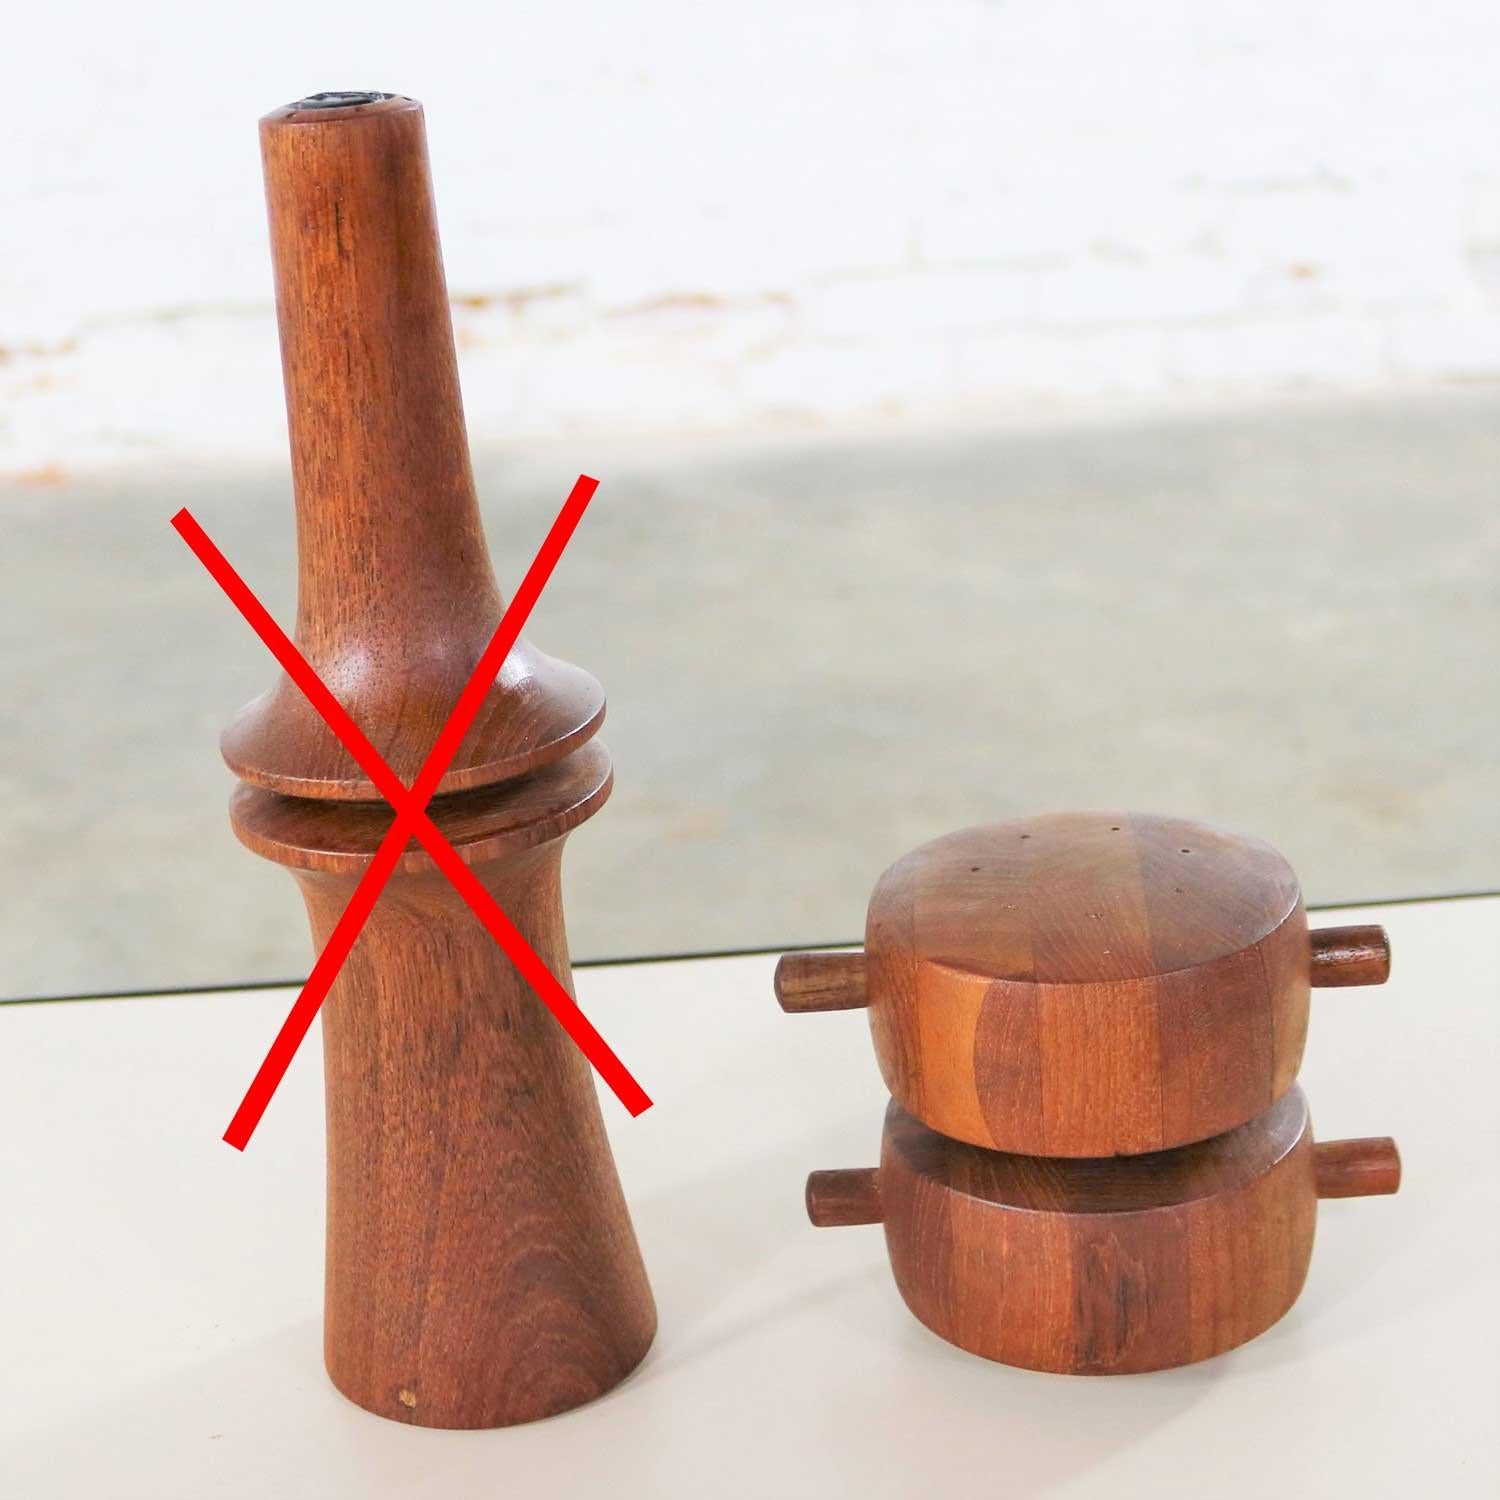 EDITED: TALL PEPPER MILL SOLD - ONLY SHORT ONE AVAILABLE
Two, but priced individually, handsome Scandinavian Modern teak pepper mills designed by Jens Quistgaard for Dansk designs. They are both fitted with Peugeot Lion grinding blades and in